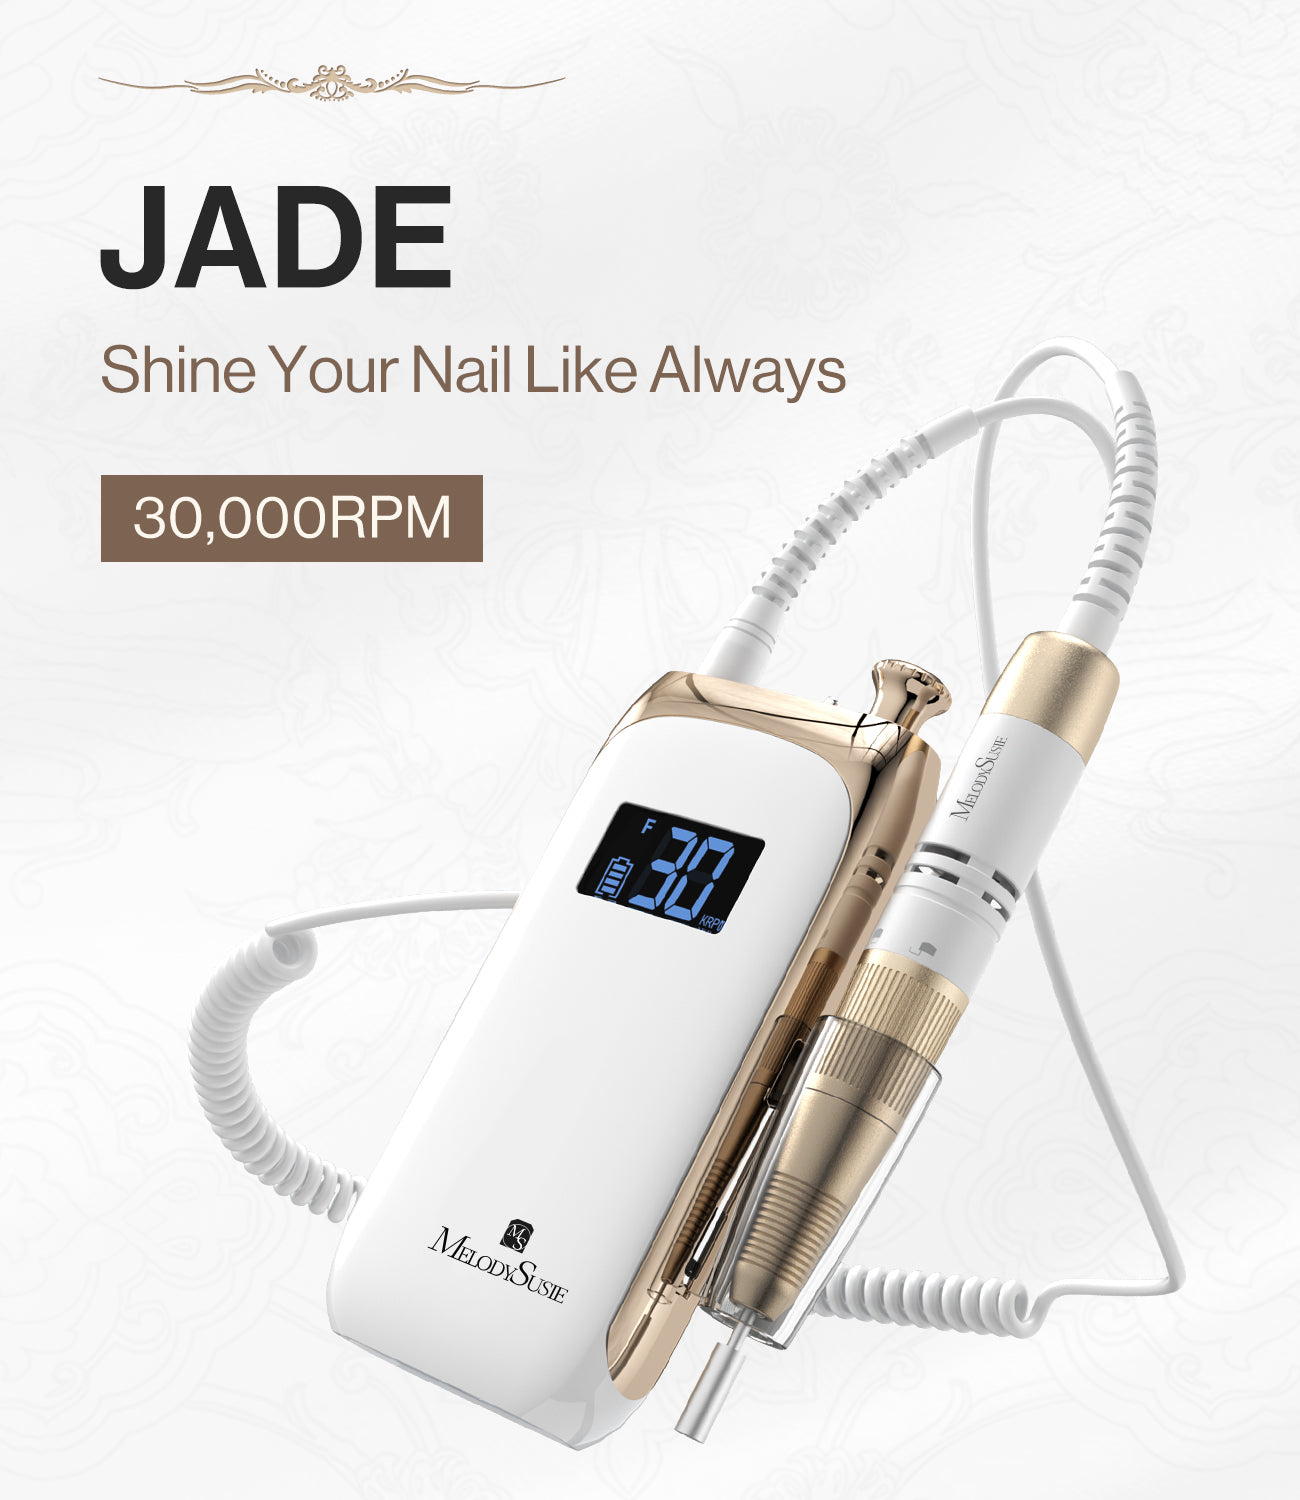 SR3-Jade (S-C320C) Rechargeable Nail Drill 30,000RPM